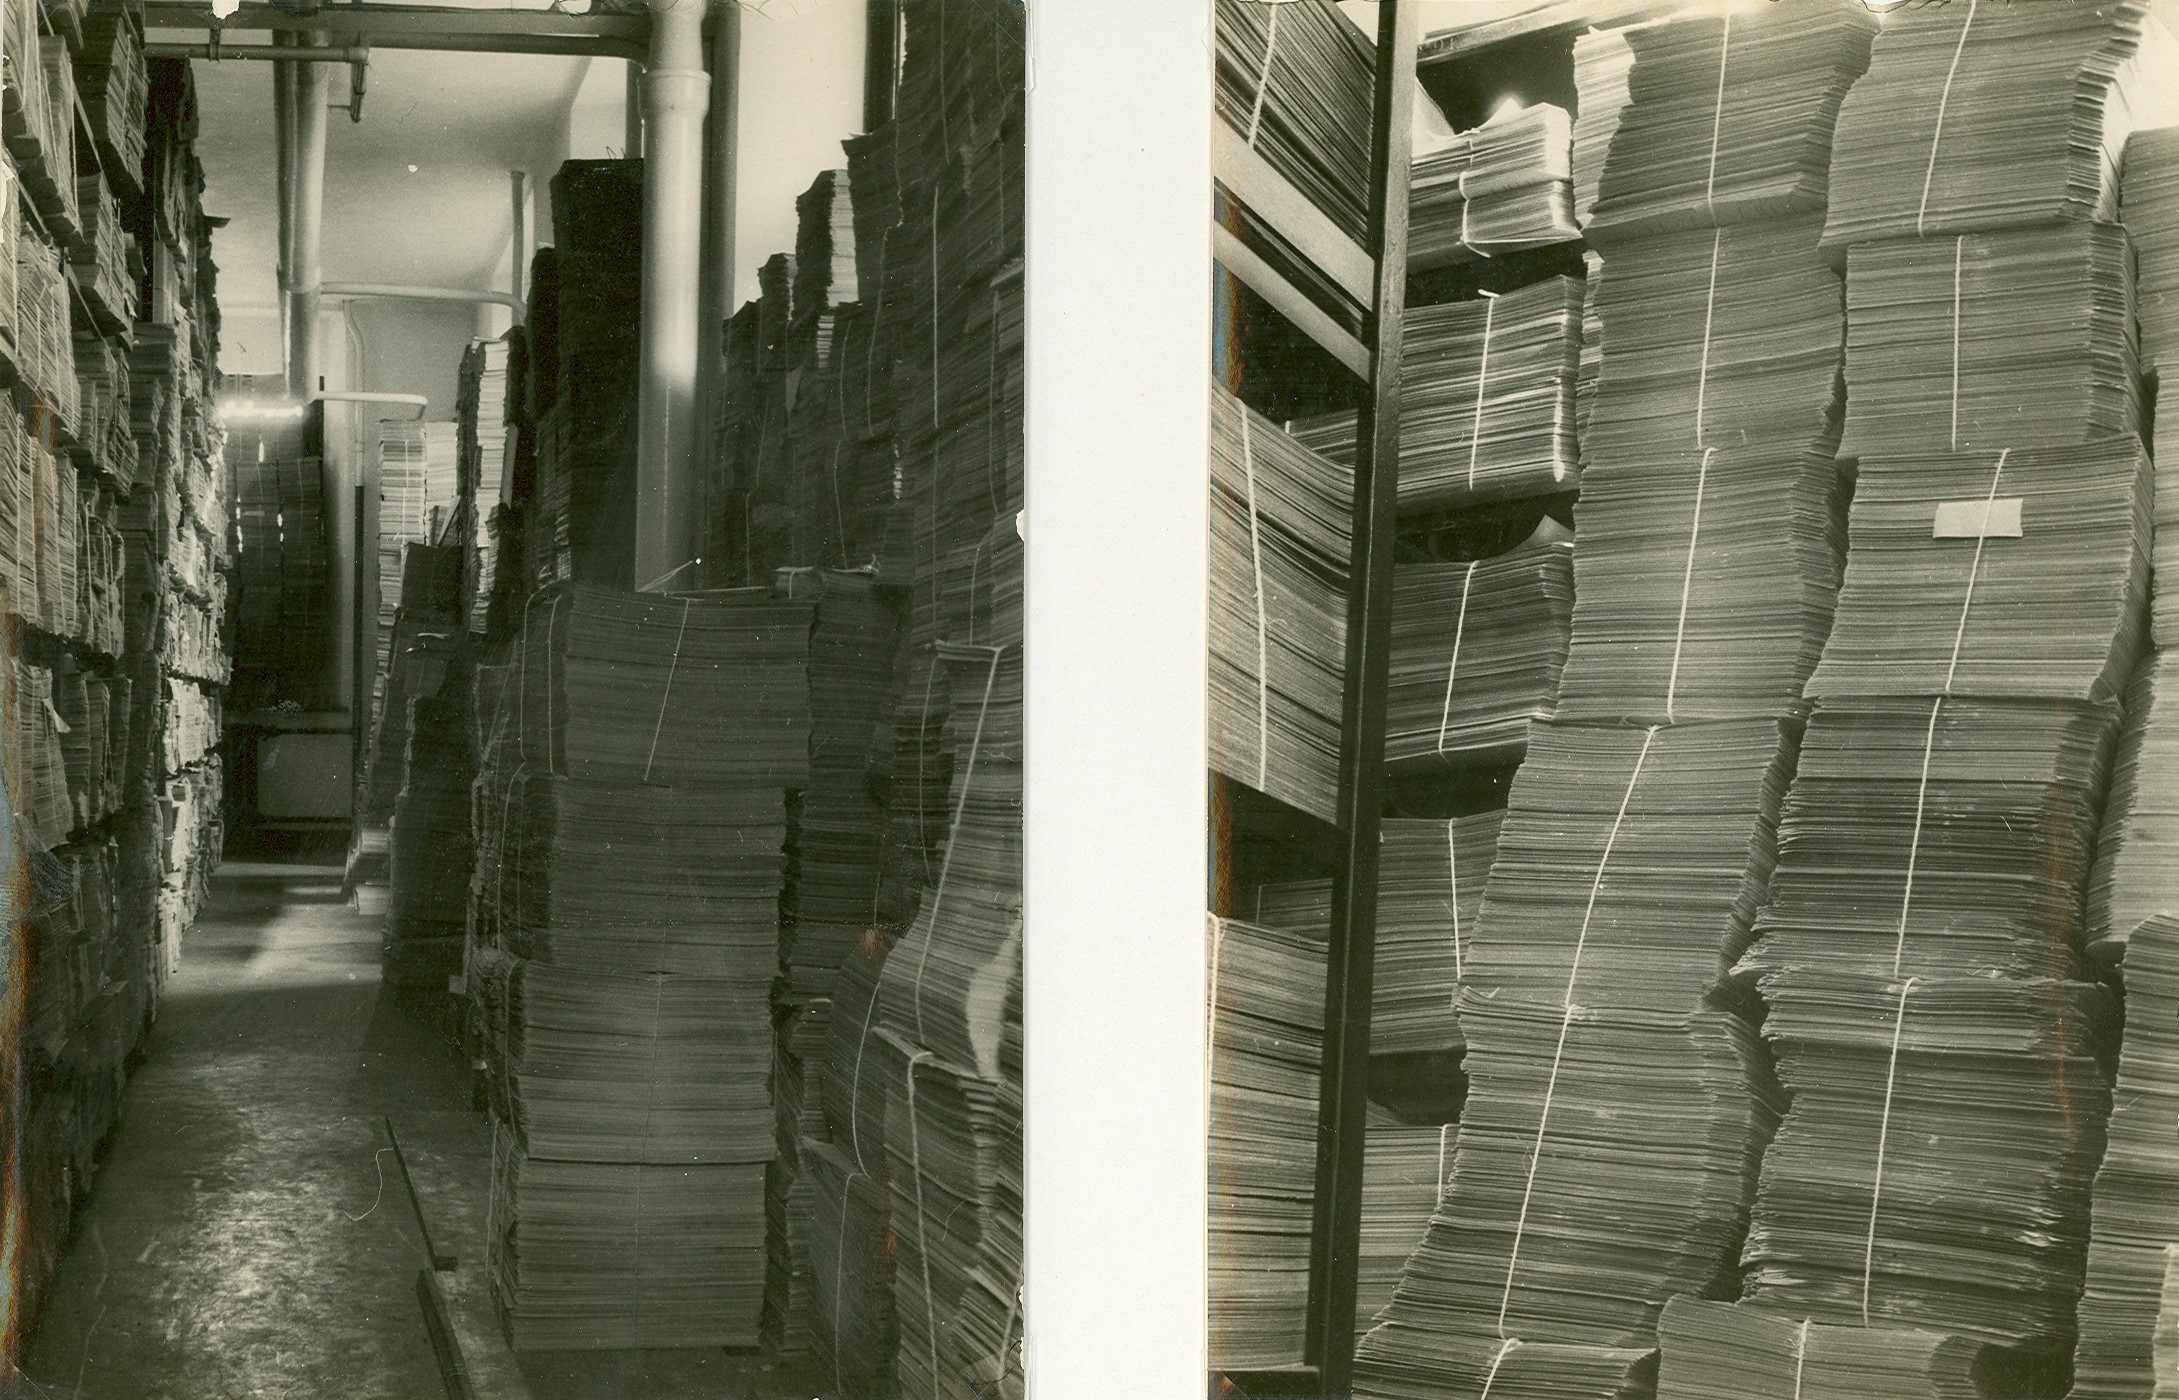 Tall stacks of forms in a hall make up the census archive